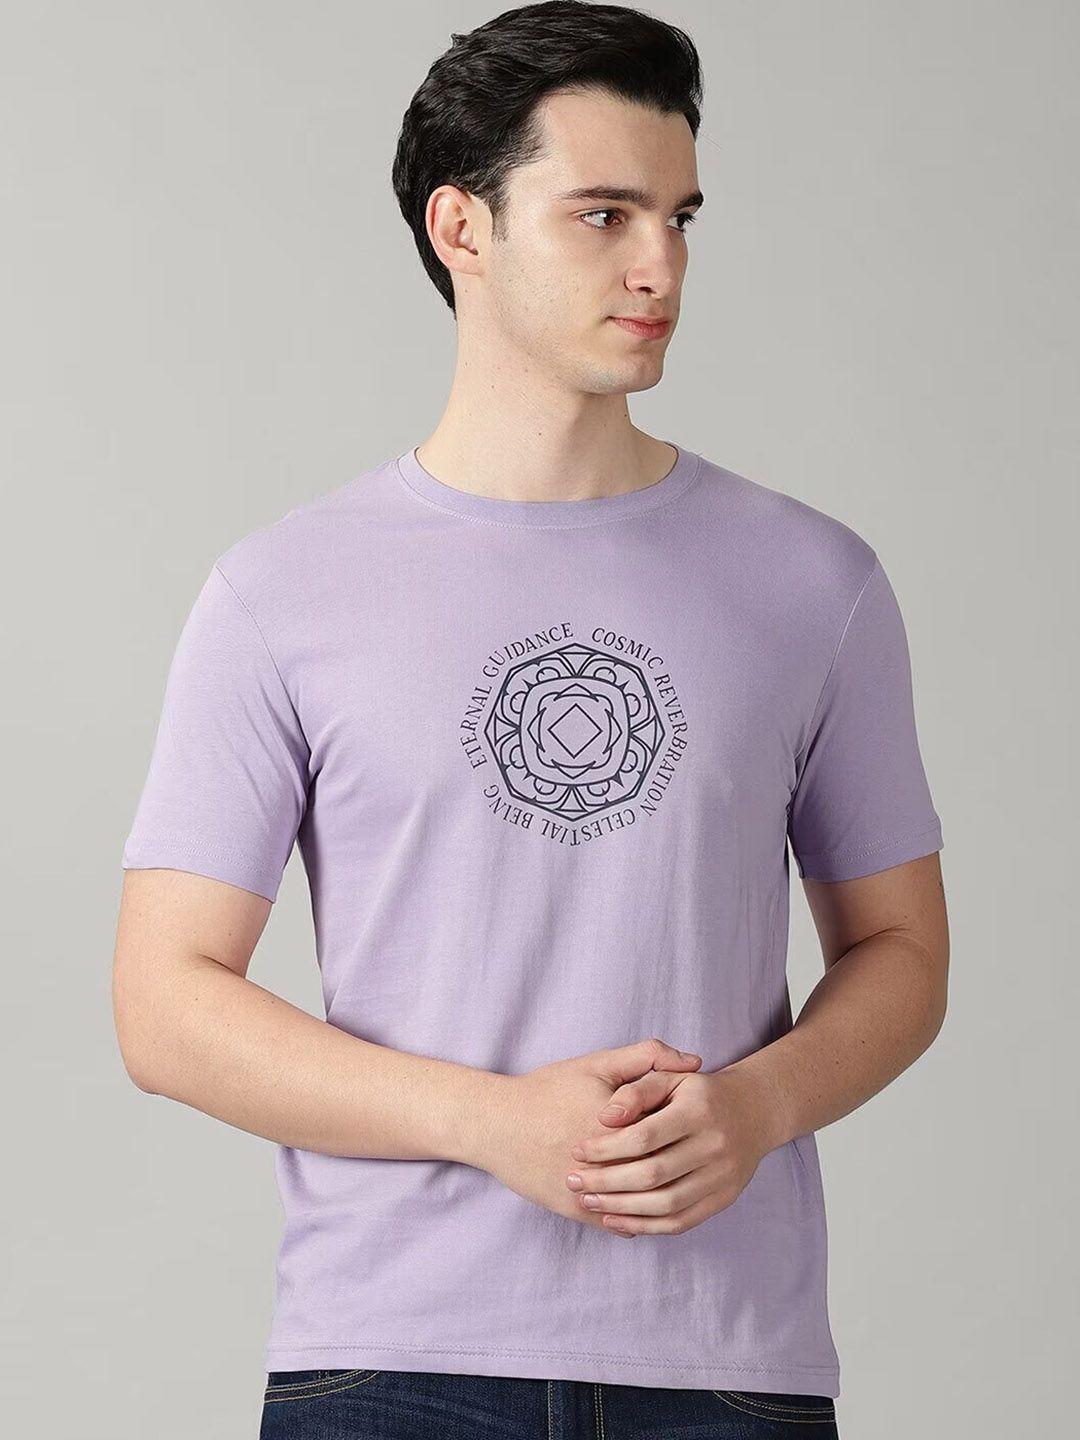 the hollander graphic printed pure cotton t-shirt